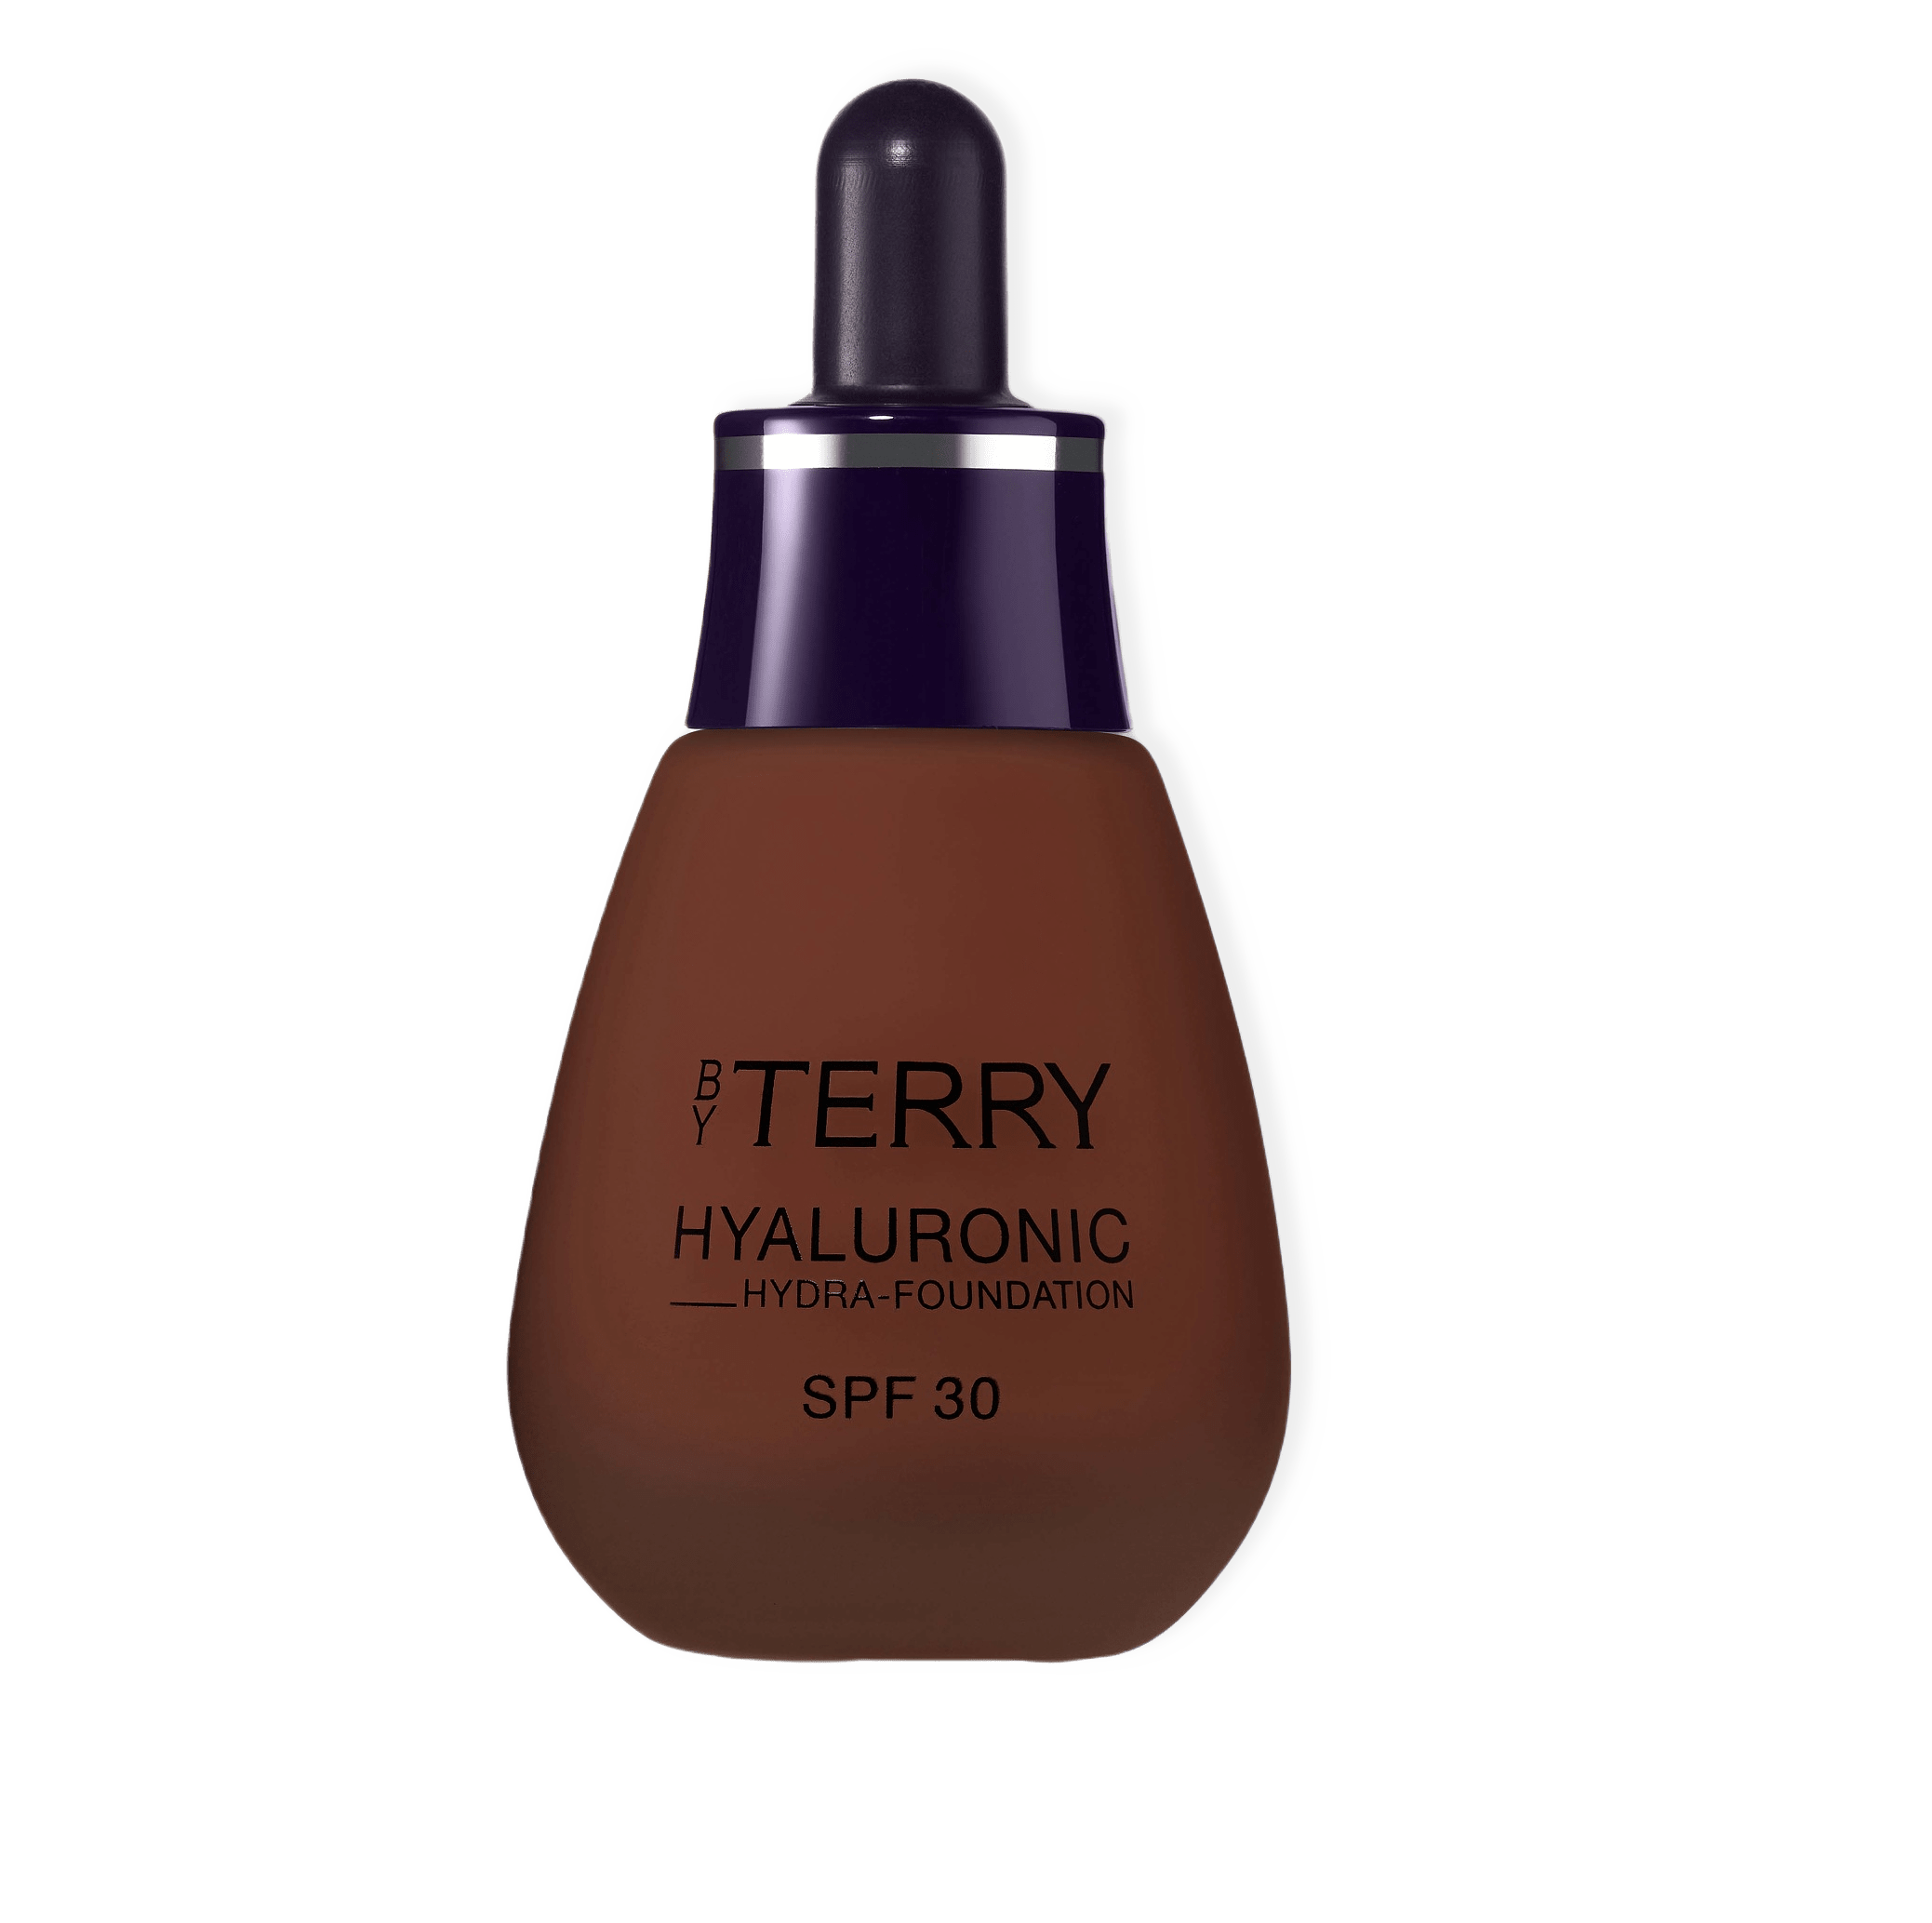 Hyaluronic Hydra Foundation från By Terry